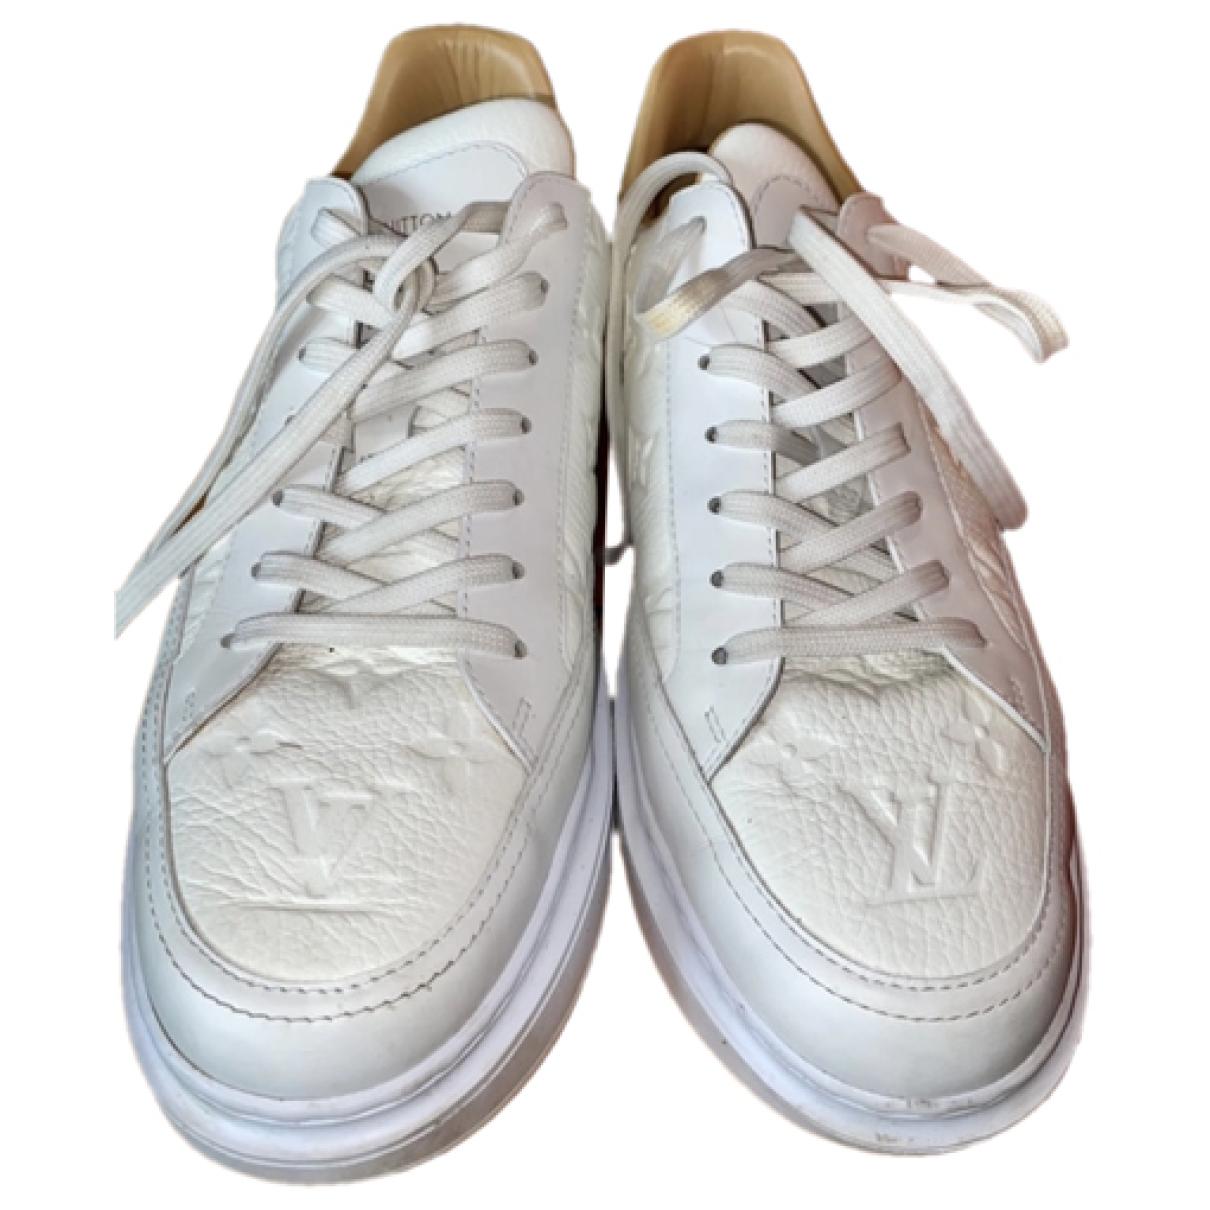 Beverly hills leather low trainers Louis Vuitton White size 43 EU